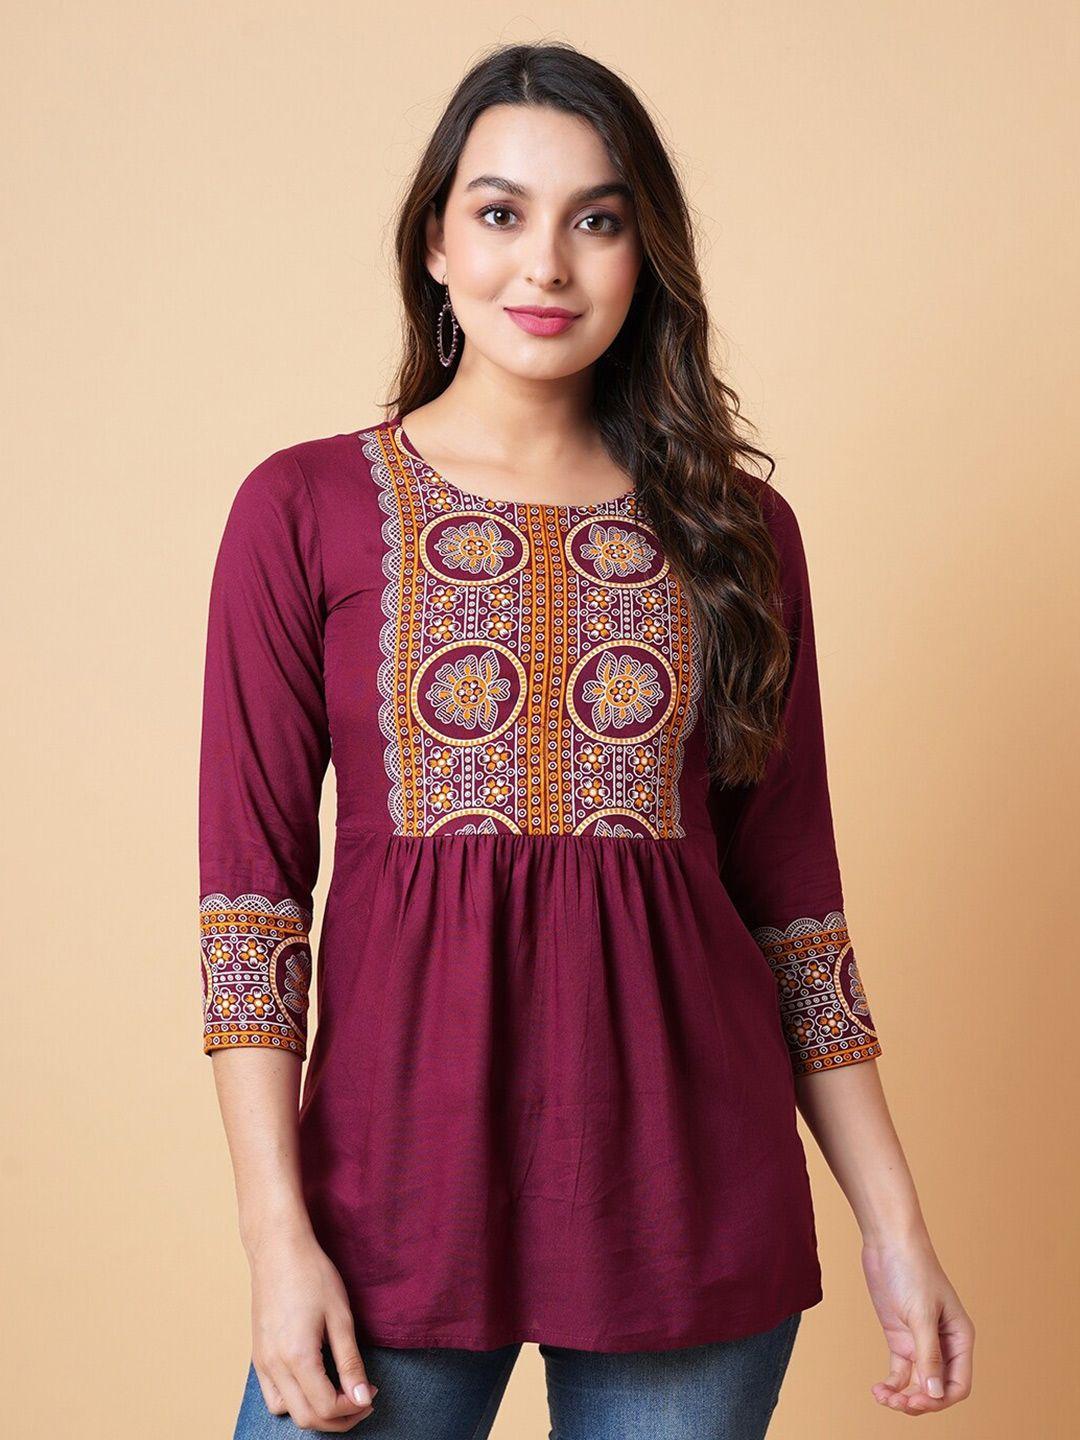 daevish floral embroidered top